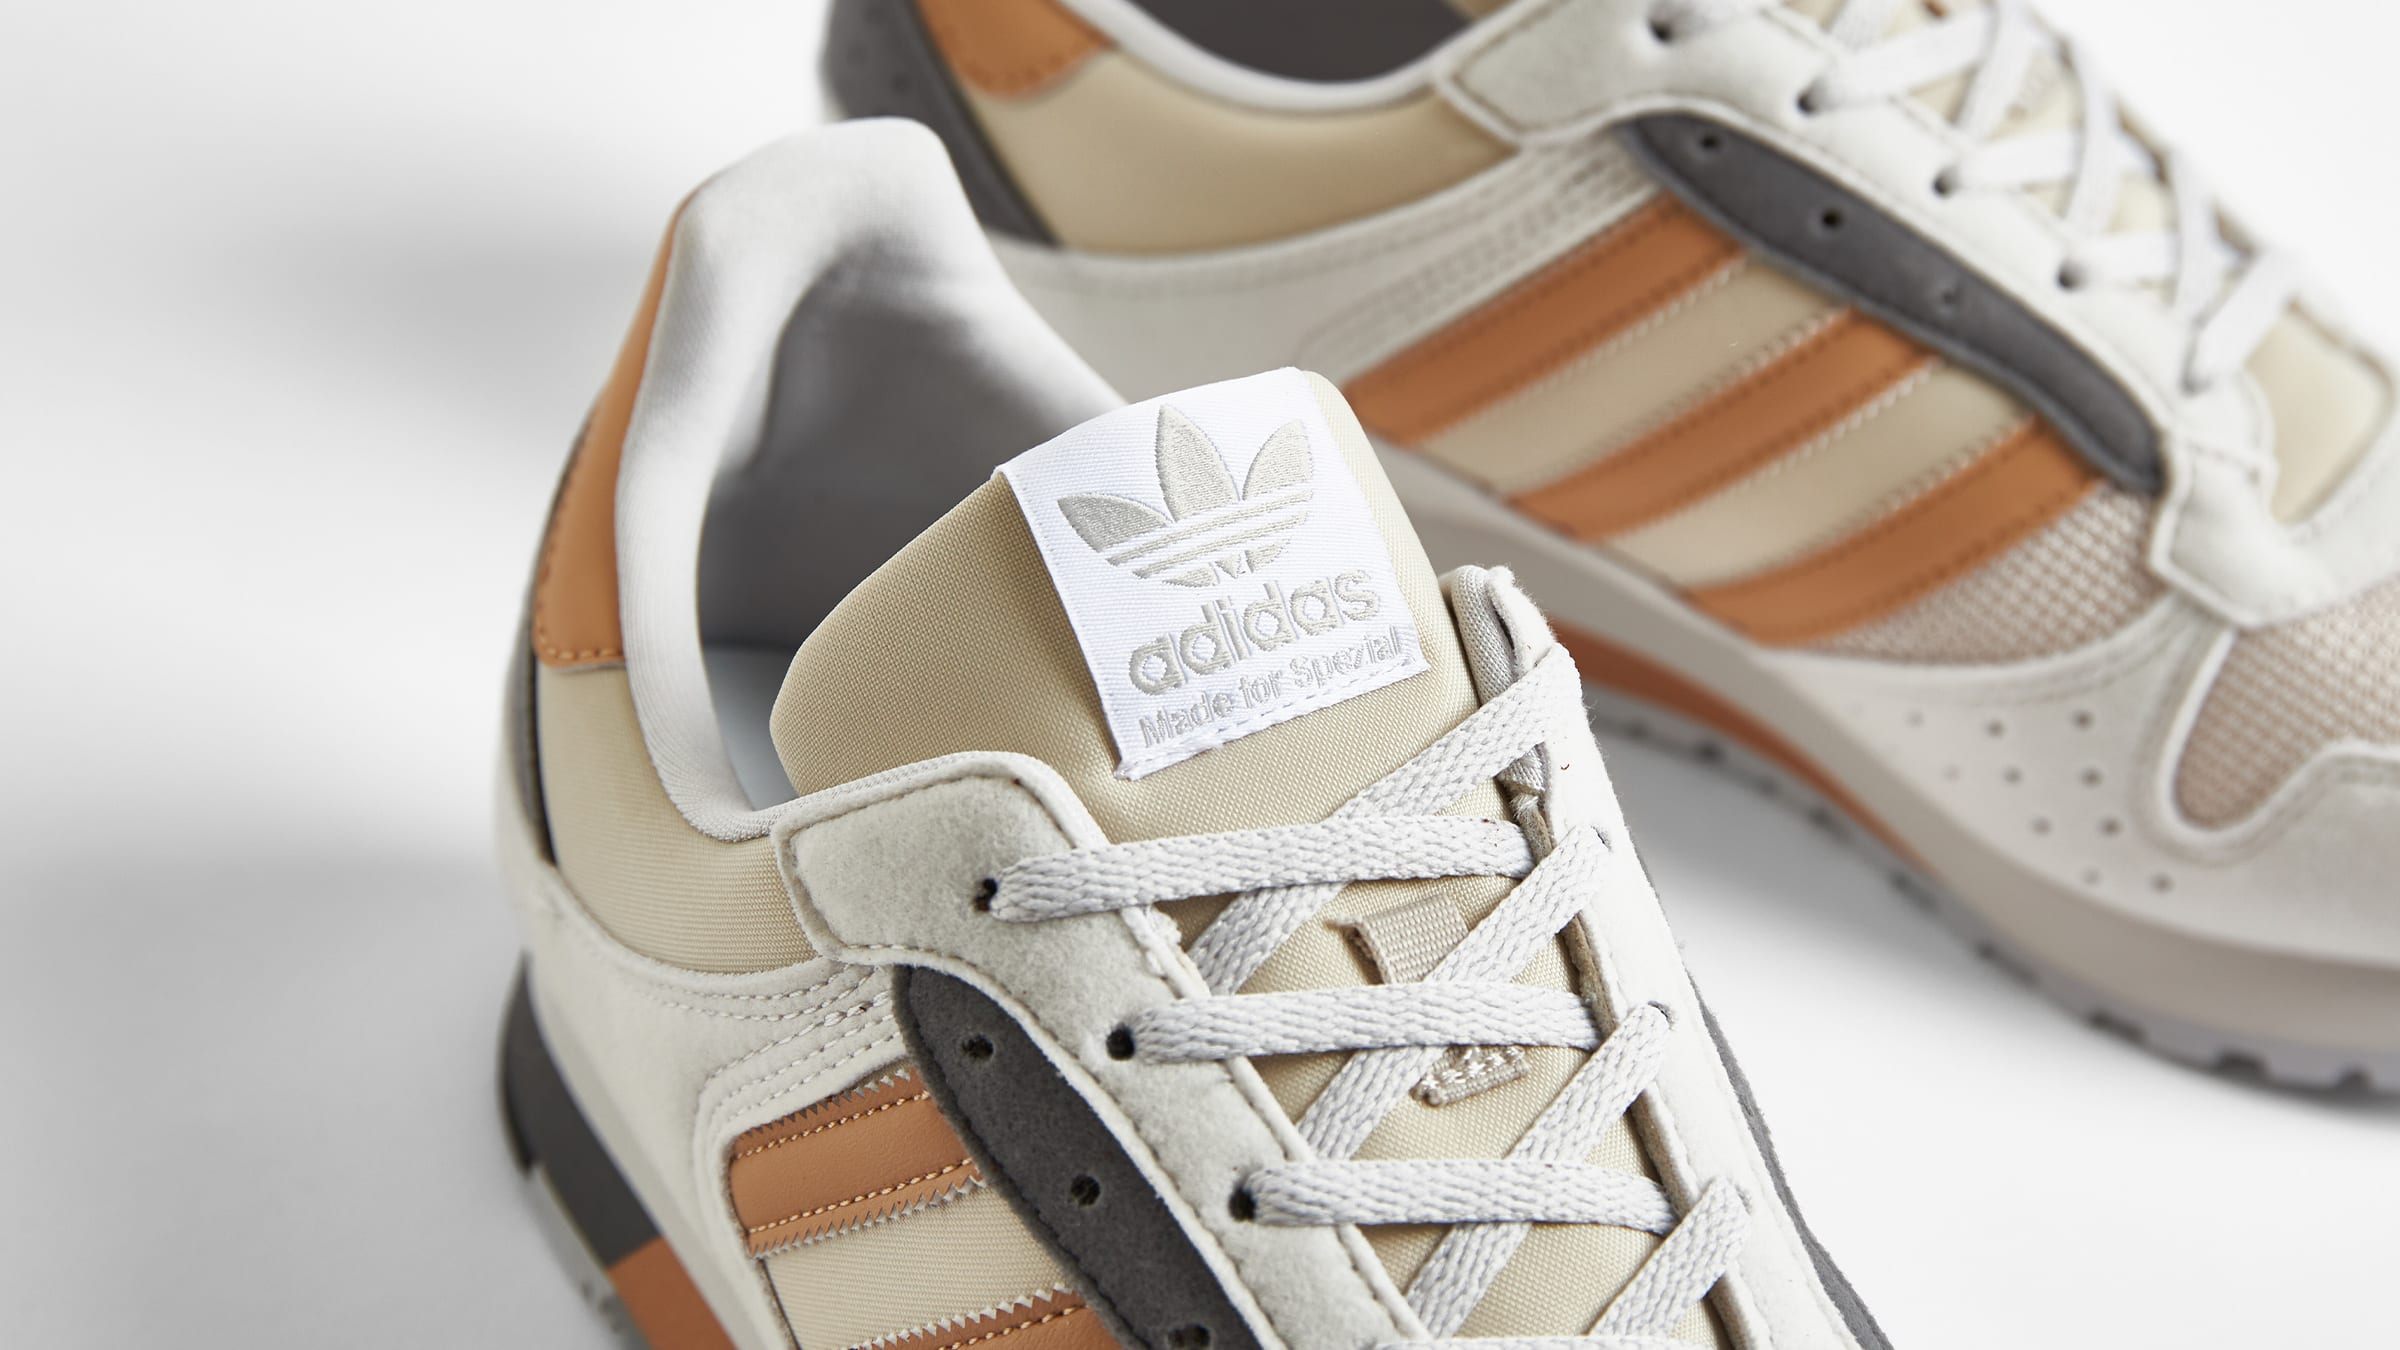 Adidas SPZL ZX 620 (Grey One & Grey Four) | END. Launches